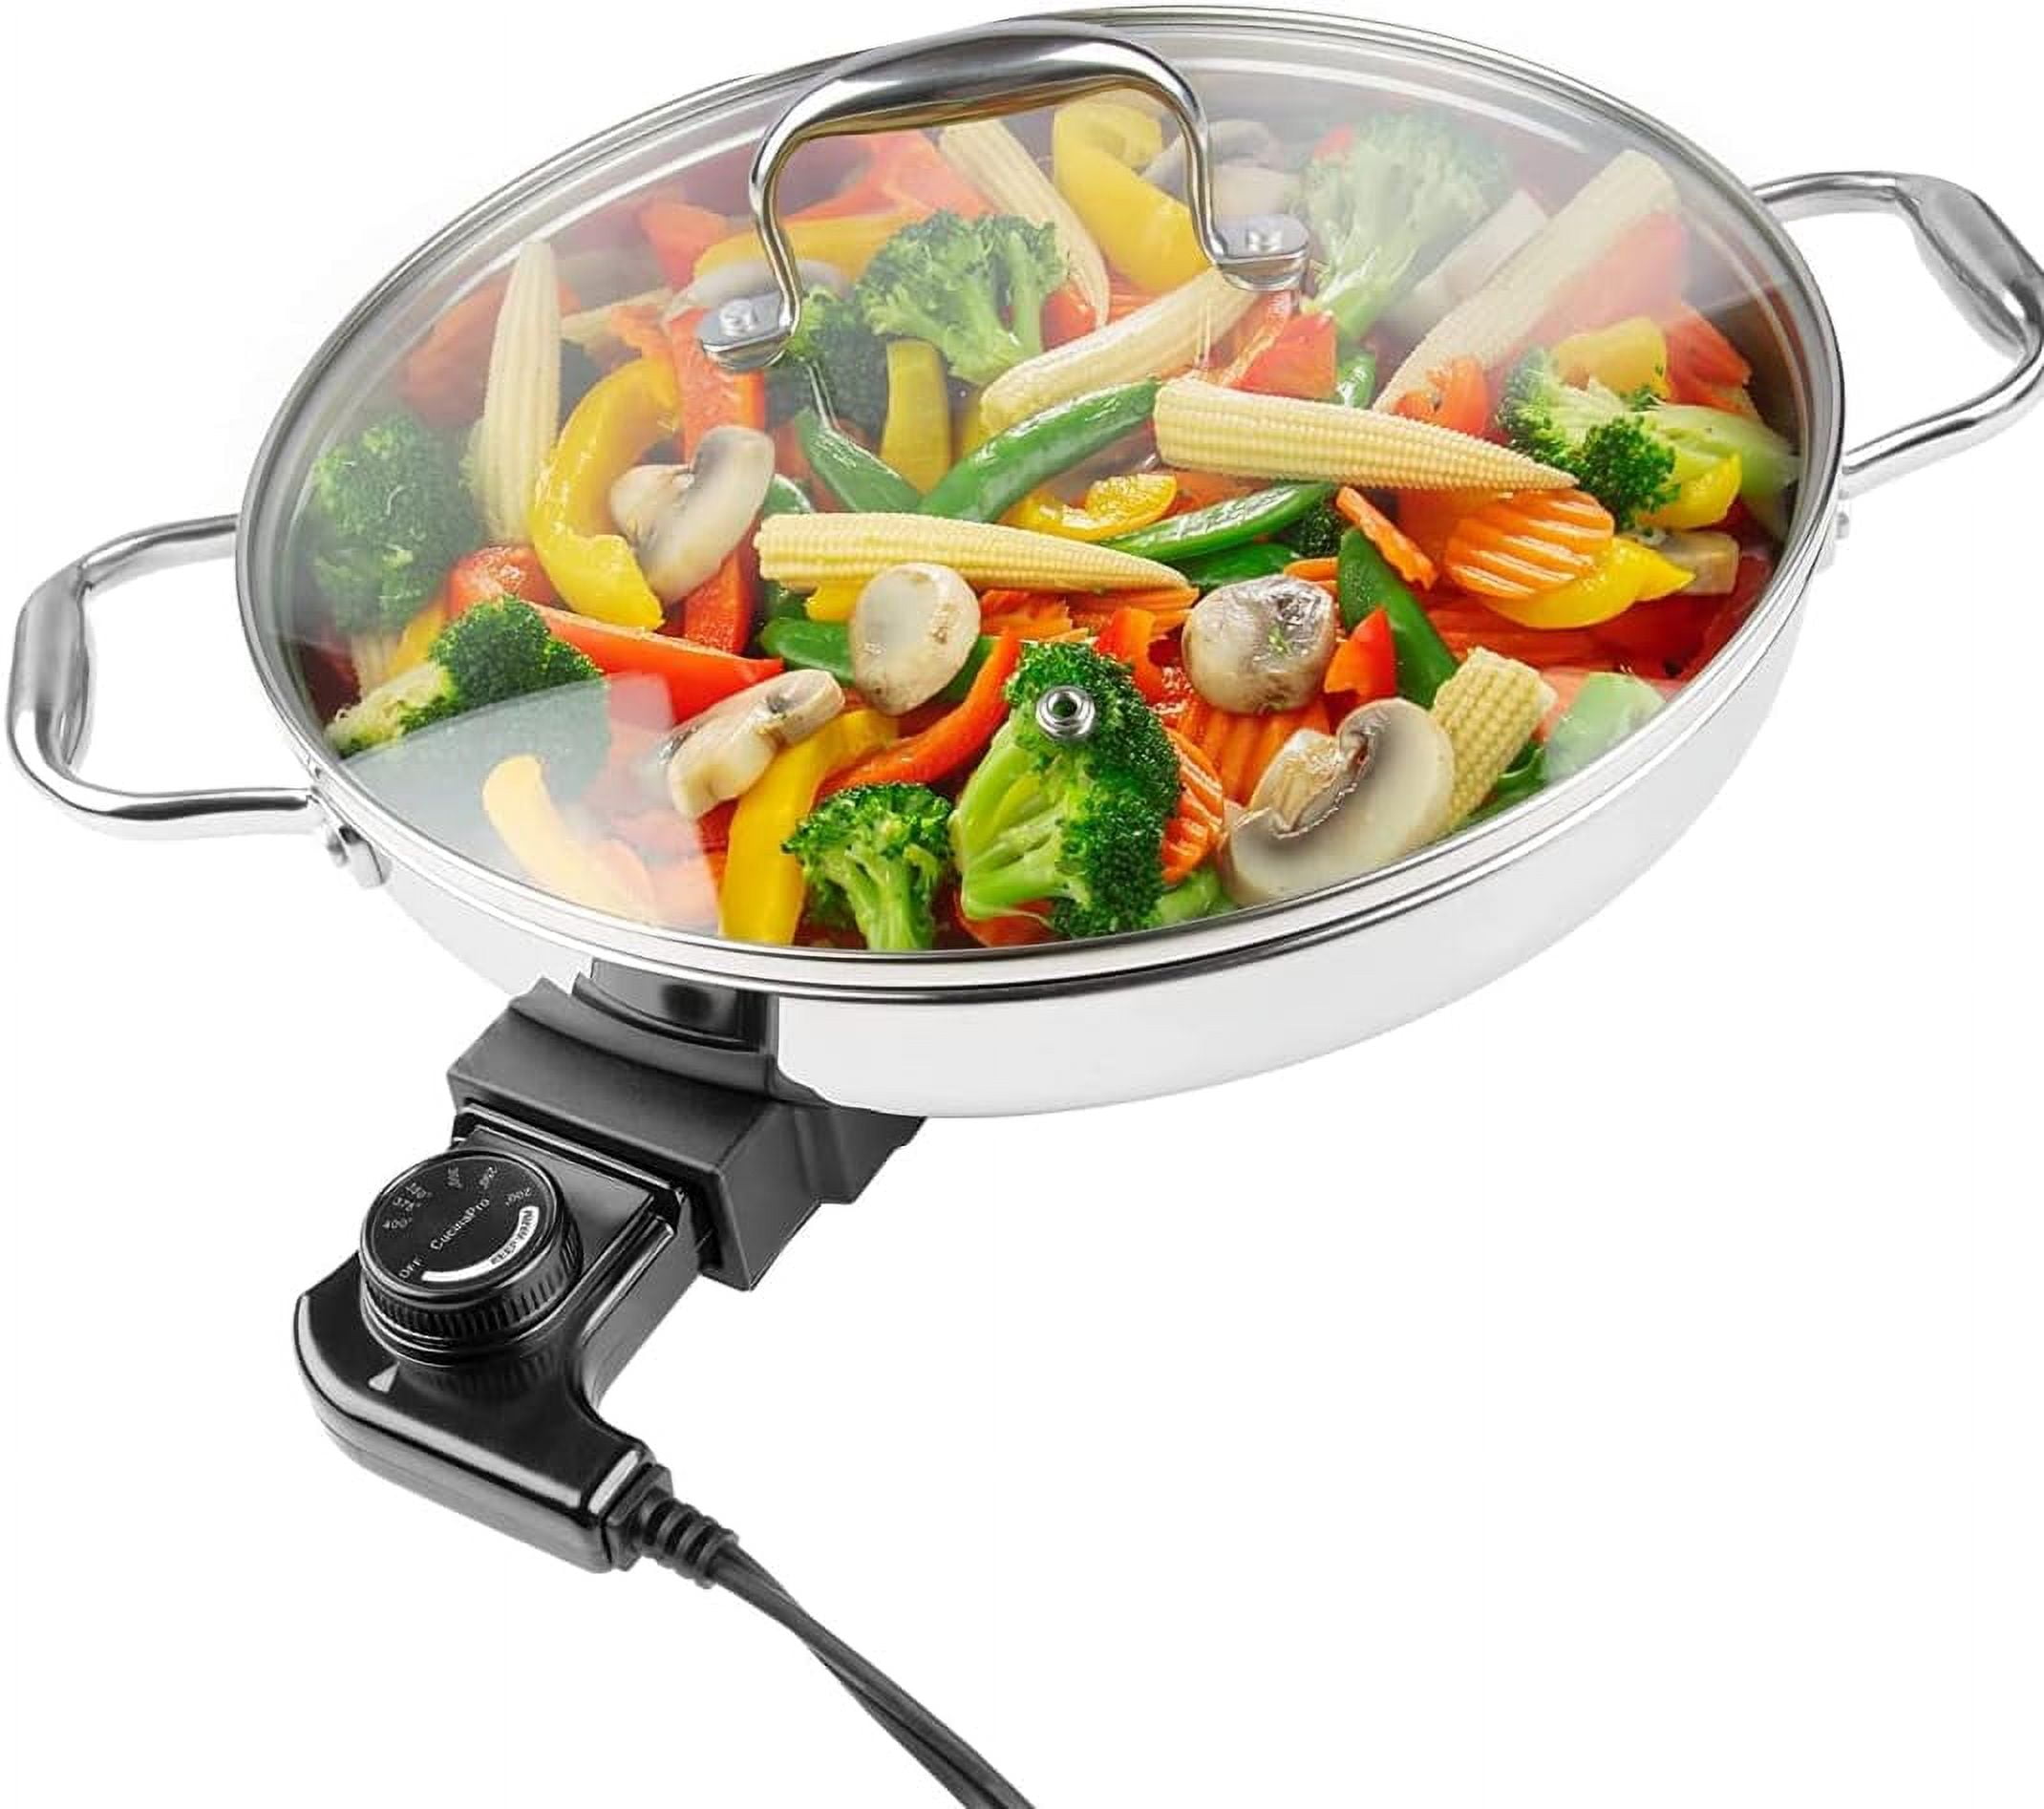  Kenmore Non-Stick Electric Skillet with Tempered Glass Lid,  Black and Grey, Deep-Dish Frying Pan, 12 x 12 Cooking Surface, Vented Lid,  One-Pot Cooking, Grill, Saute, Stir-Fry, Stew: Home & Kitchen